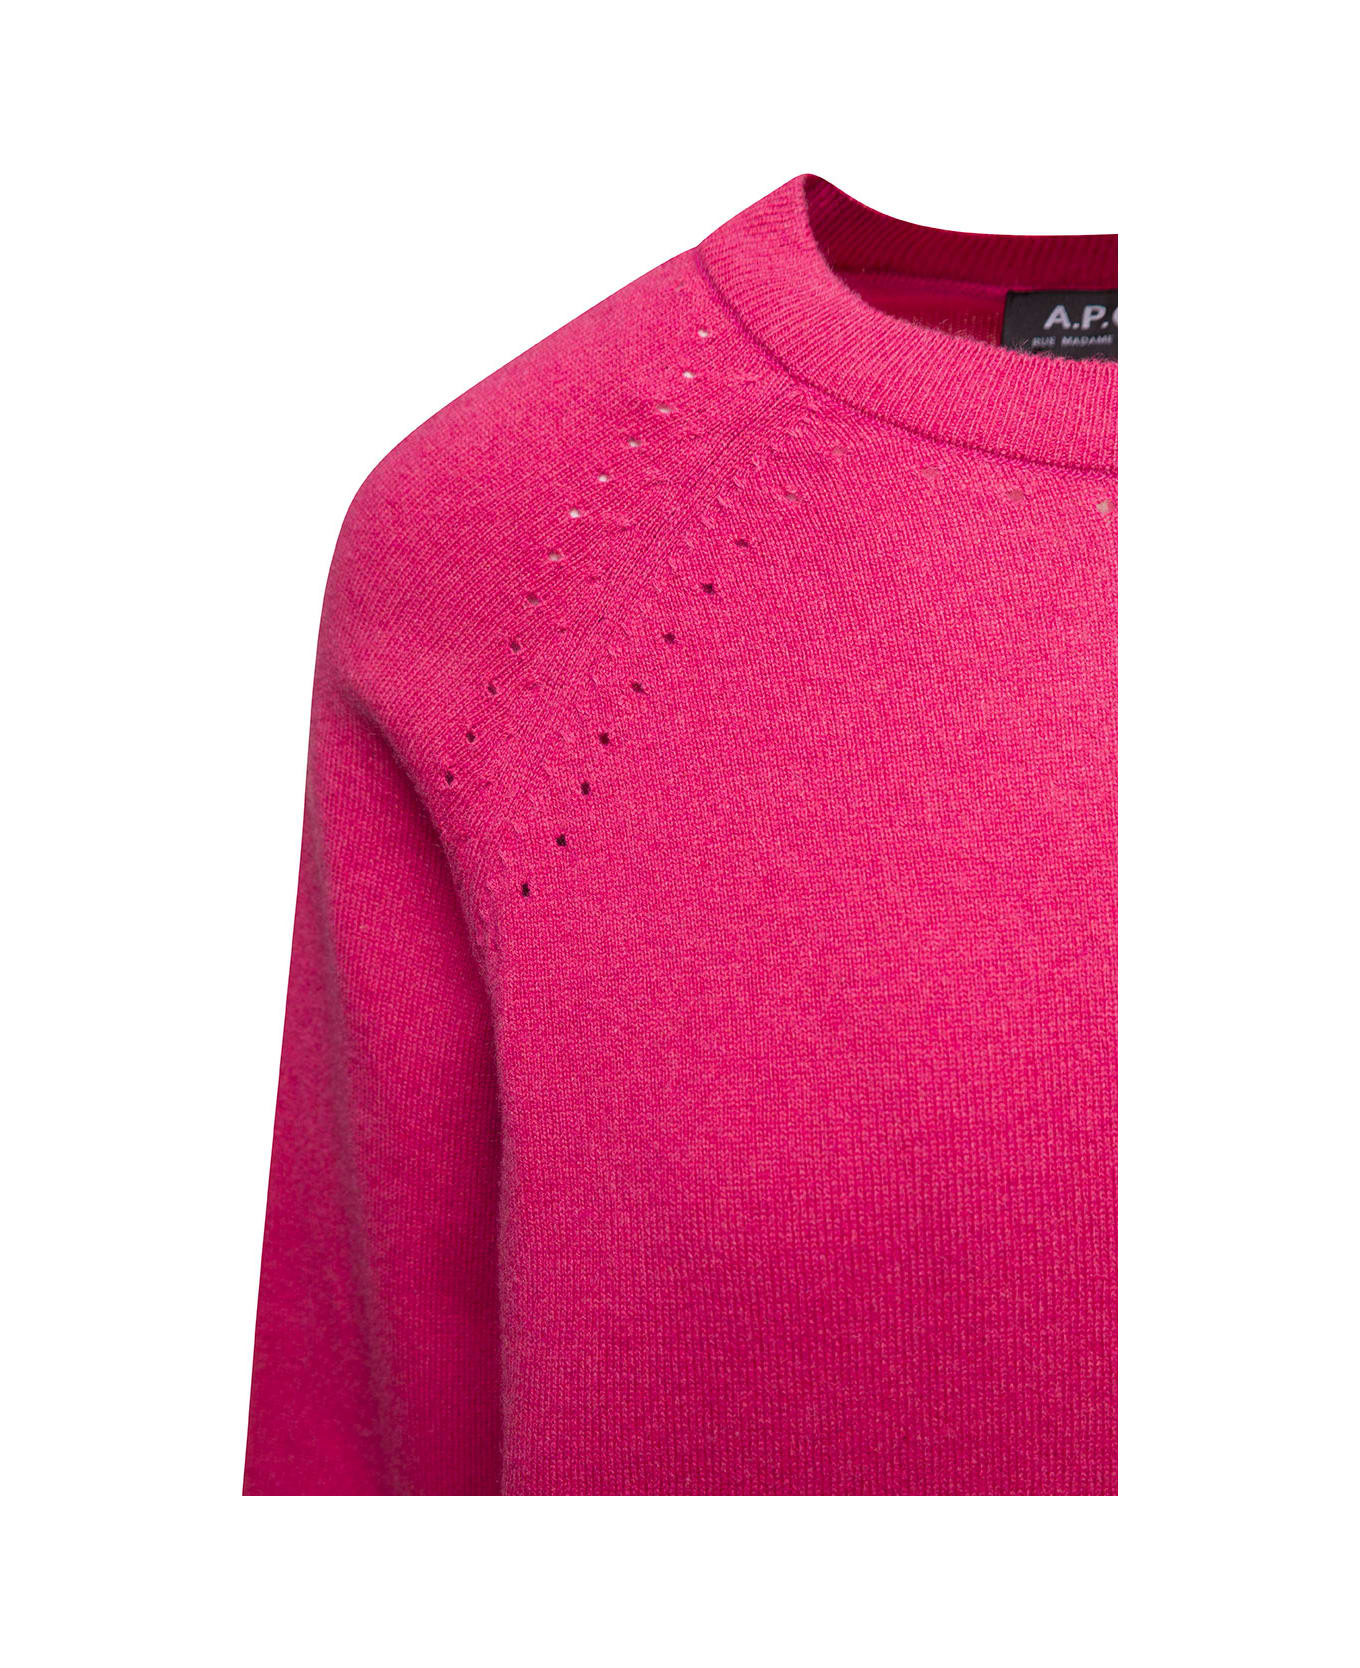 A.P.C. 'rosanna' Fuchsia Crewneck Sweater With Perforated Details In Cotton And Cashmere Woman - Fuxia